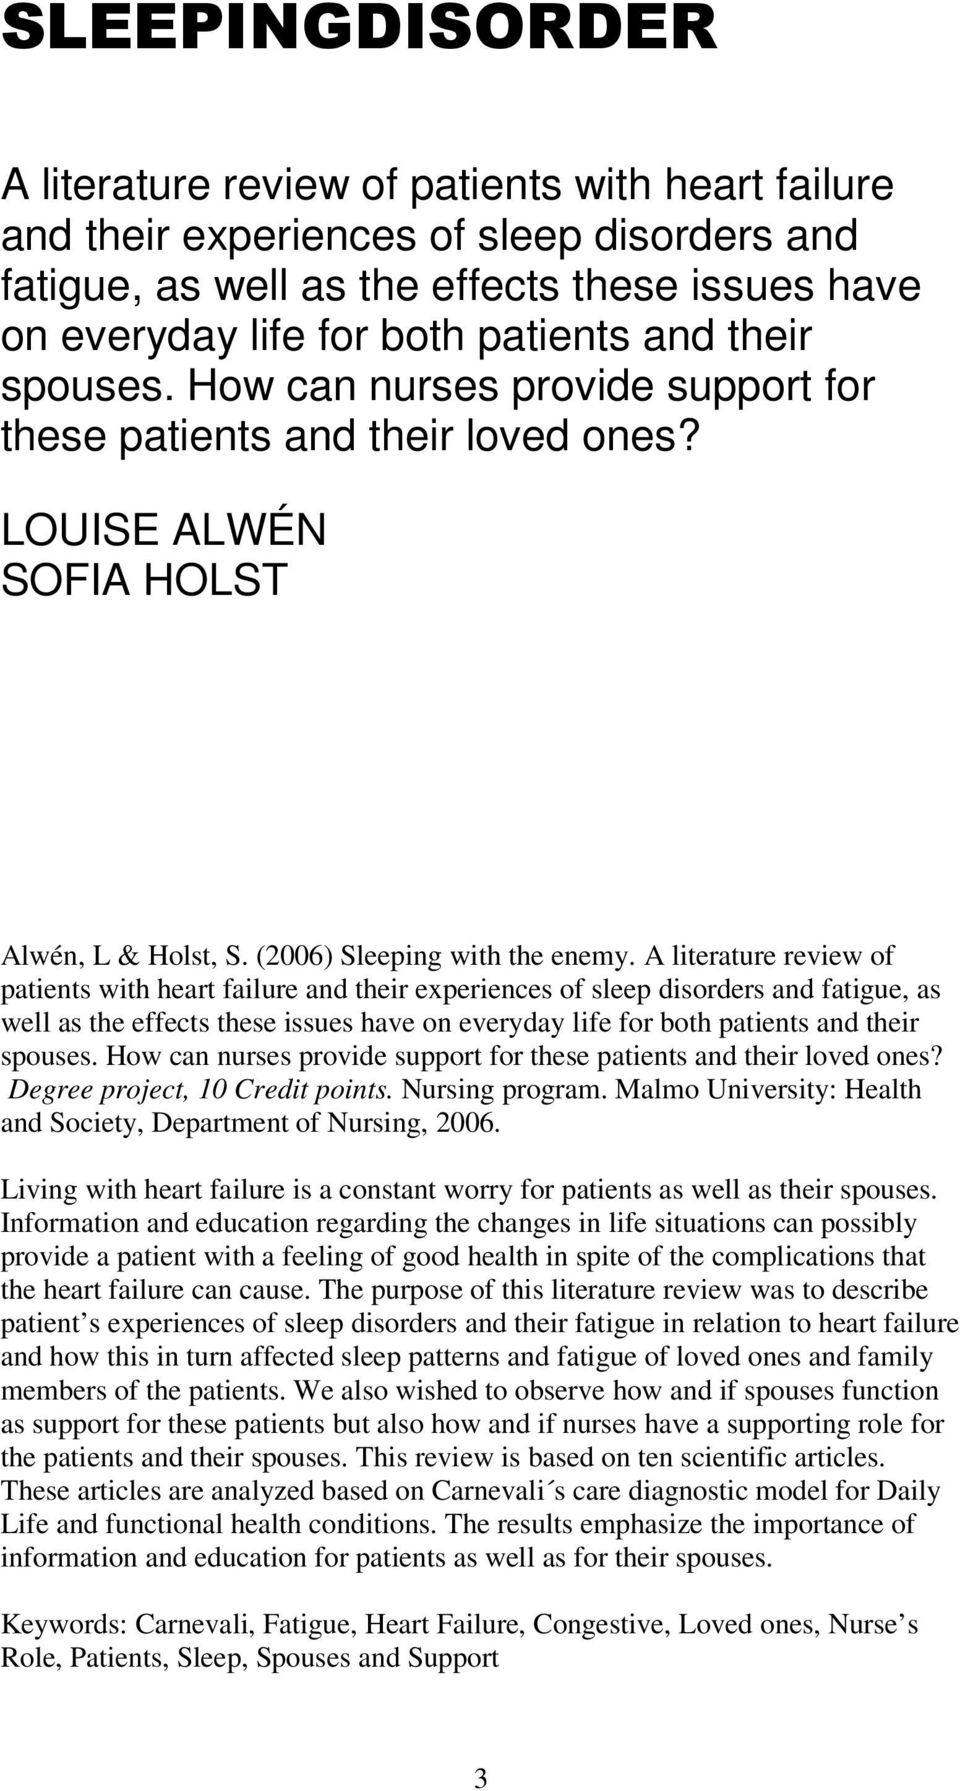 A literature review of patients with heart failure and their experiences of sleep disorders and fatigue, as well as the effects these issues have on everyday life for both patients and their spouses.